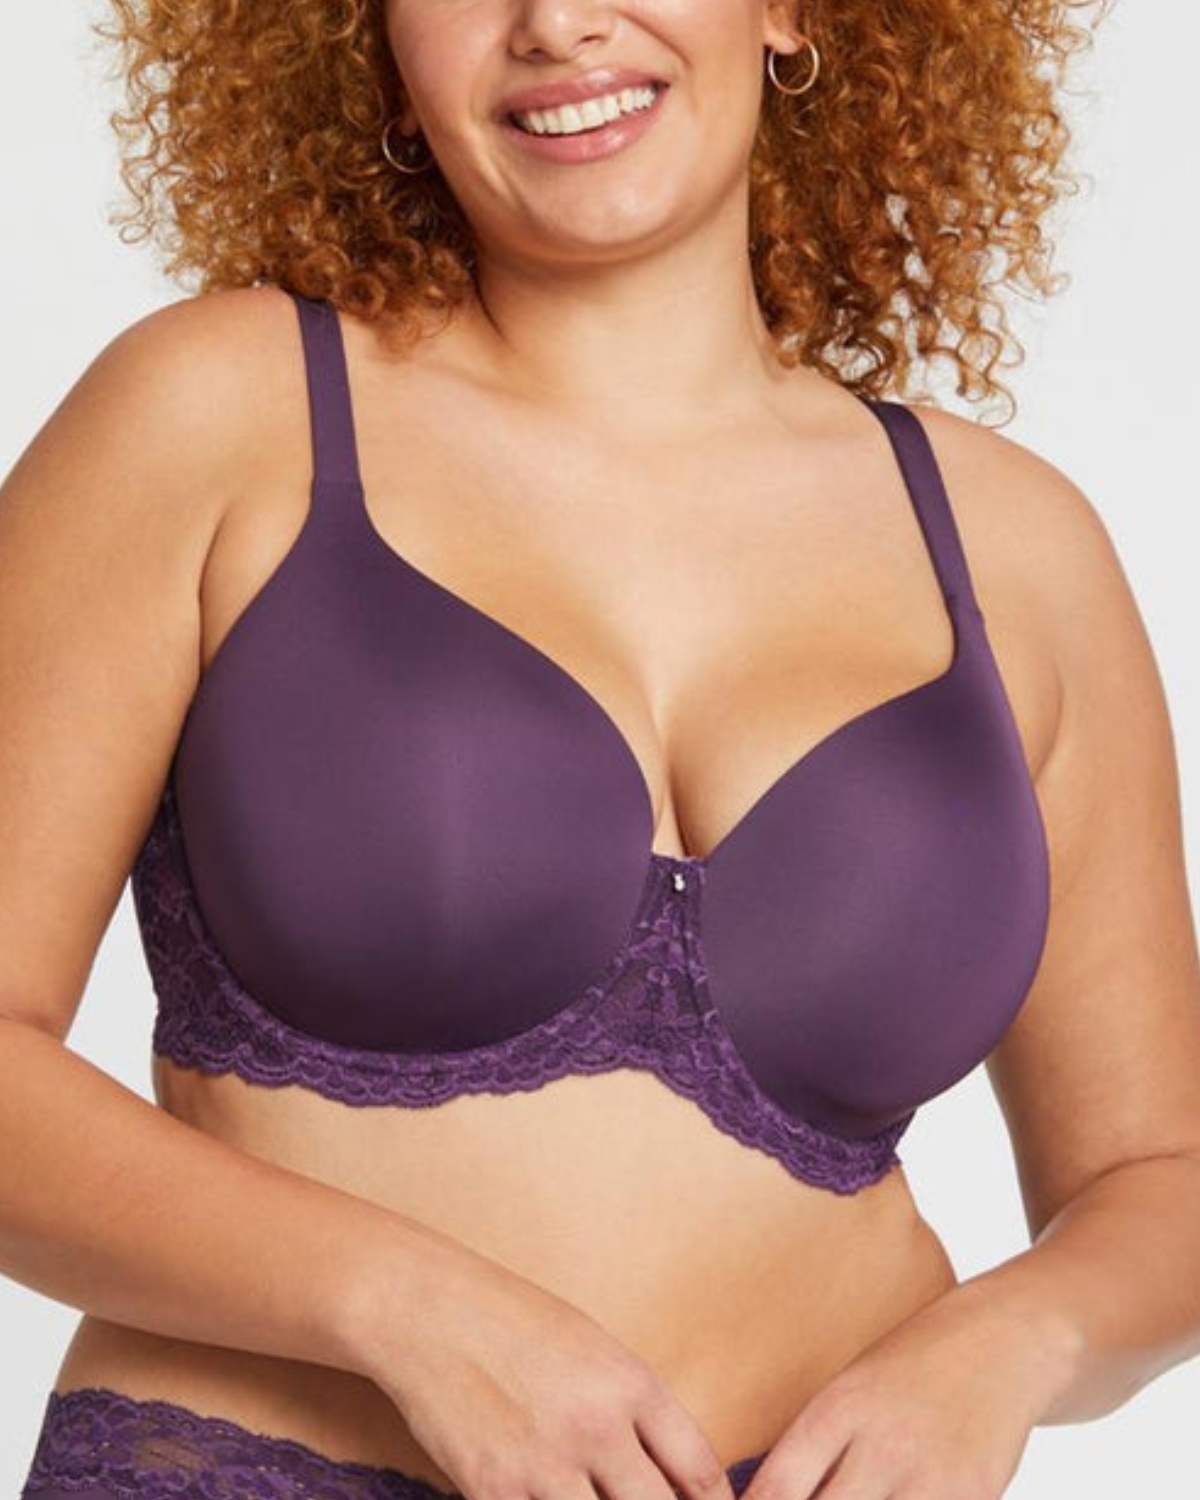 Montelle Pure Plus Full Coverage T-Shirt Bra in Gemstone Blue FINAL SALE  (40% Off) - Busted Bra Shop